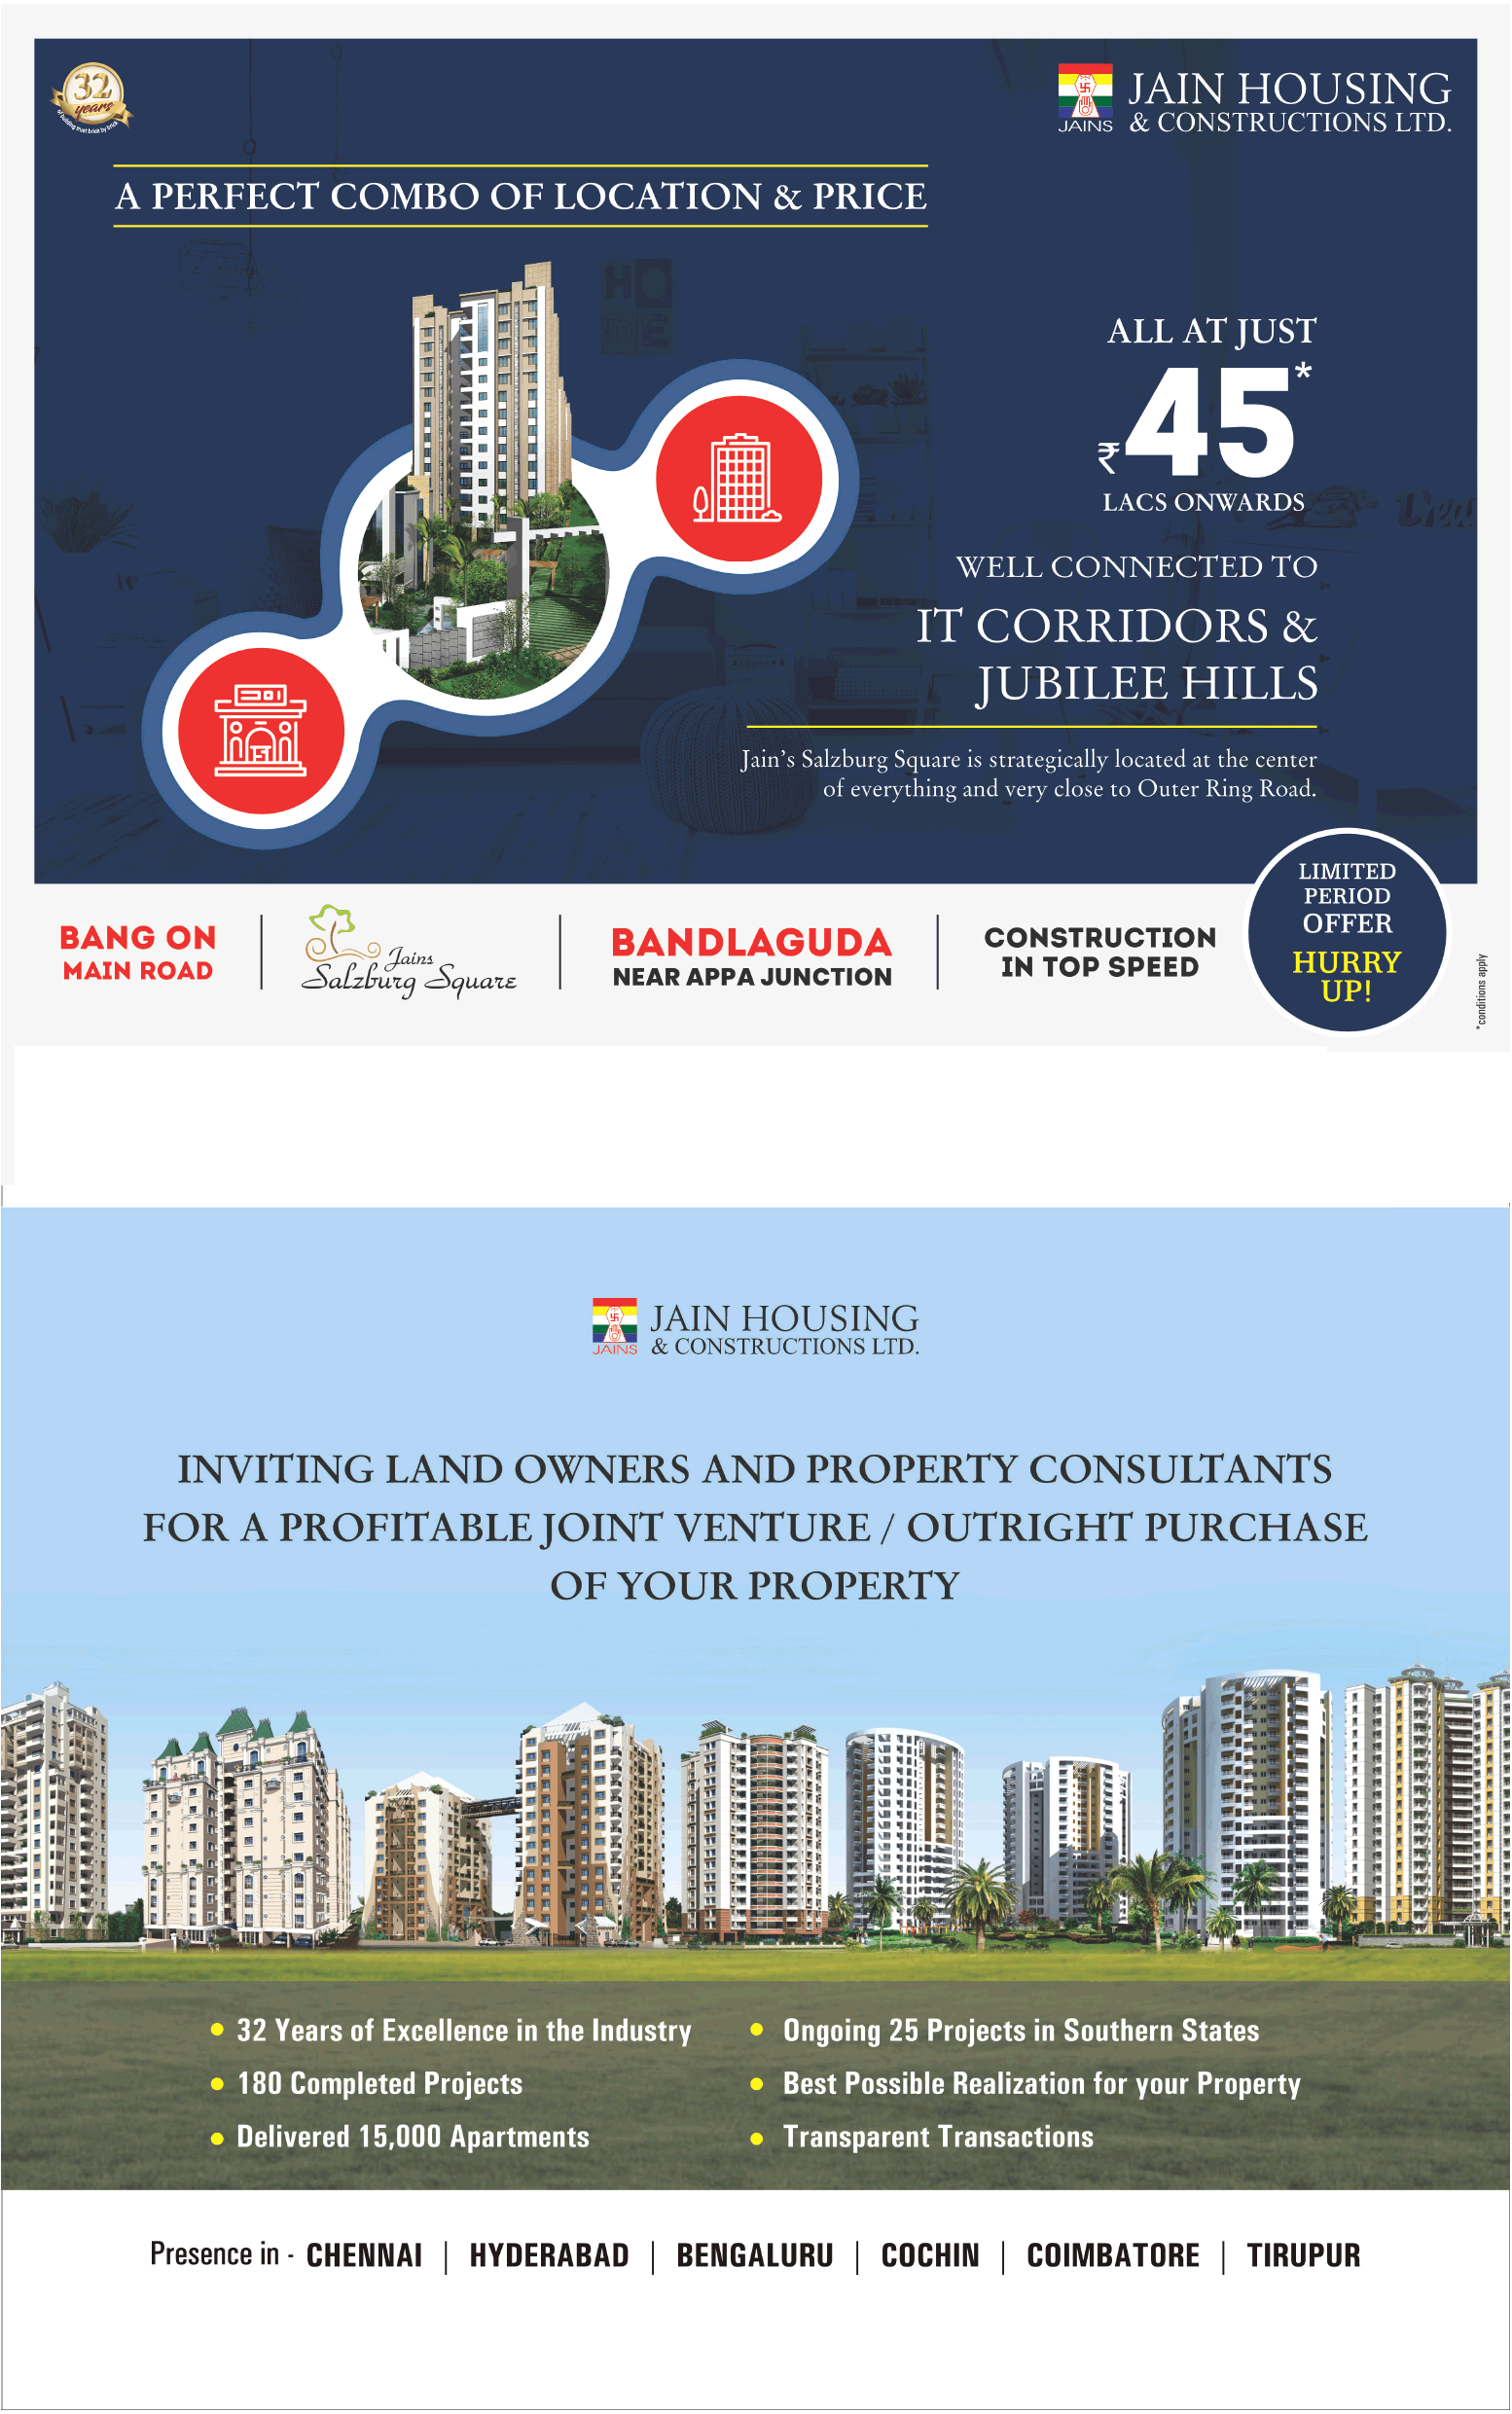 Jain Housing a perfect combo of location and price in Hyderabad